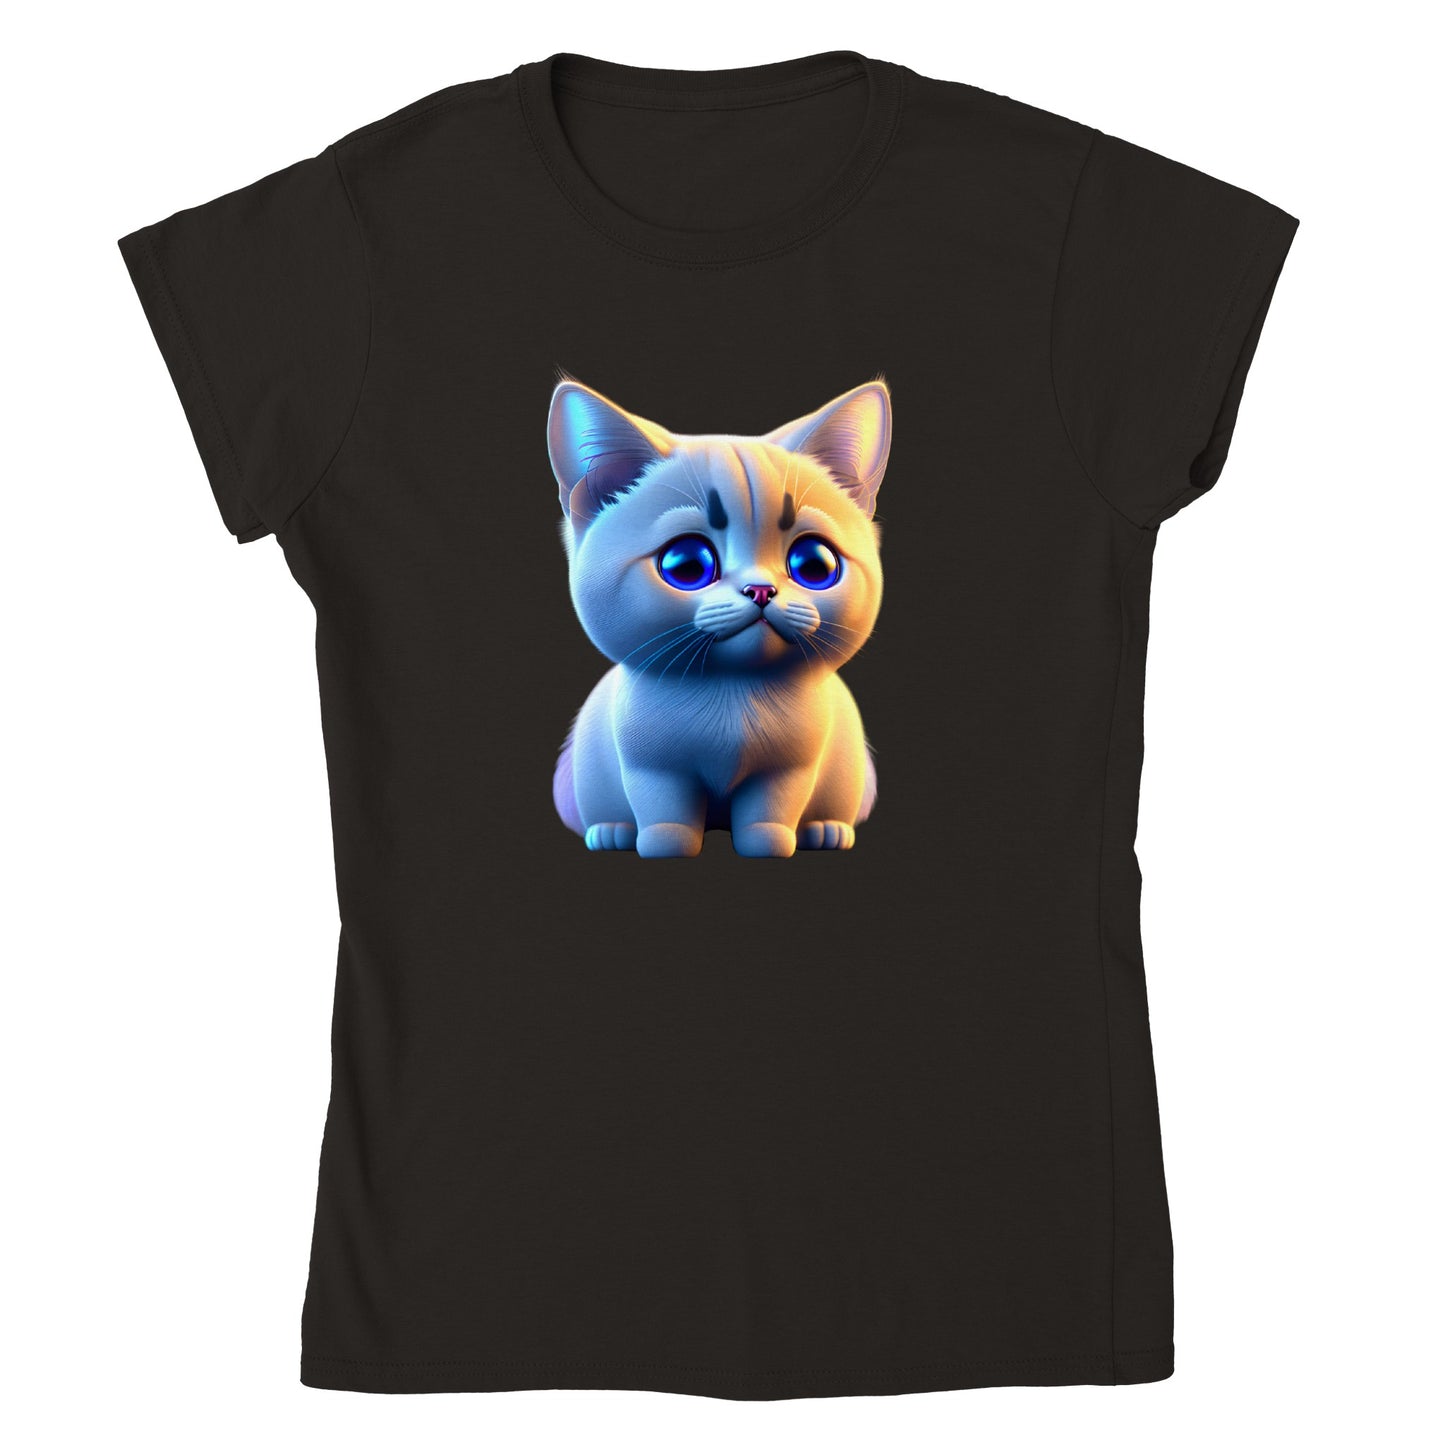 Adorable, Cool, Cute Cats and Kittens Toy - Classic Women’s Crewneck T-Shirt 19